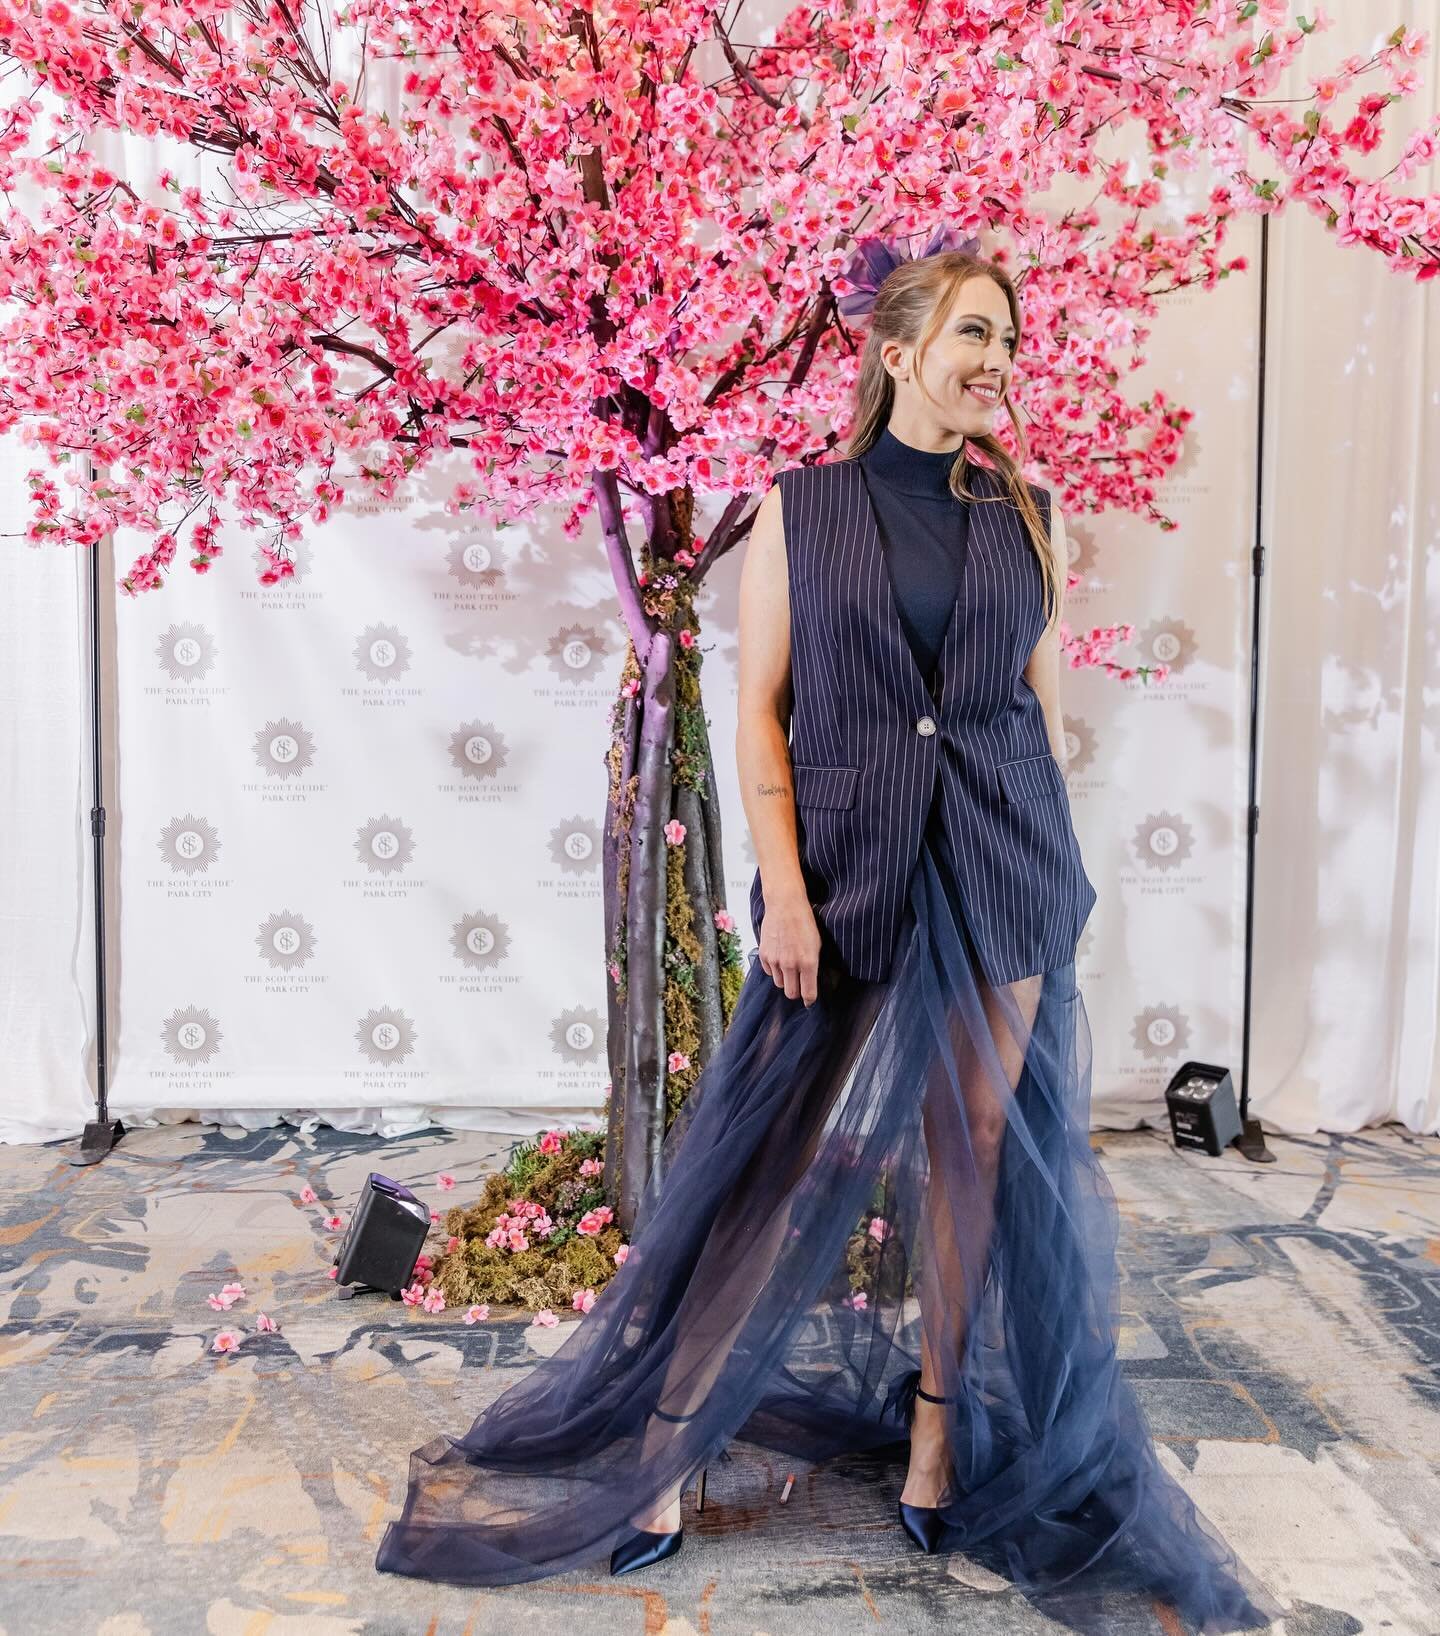 Recap! 🌸 @tsgparkcity Paris in the Springtime Fashion Show!

We had the greatest time showcasing both classic and custom pieces from Zenzee!! Thank you to our gorgeous models and all of the event partners for creating such a magical experience. Spec